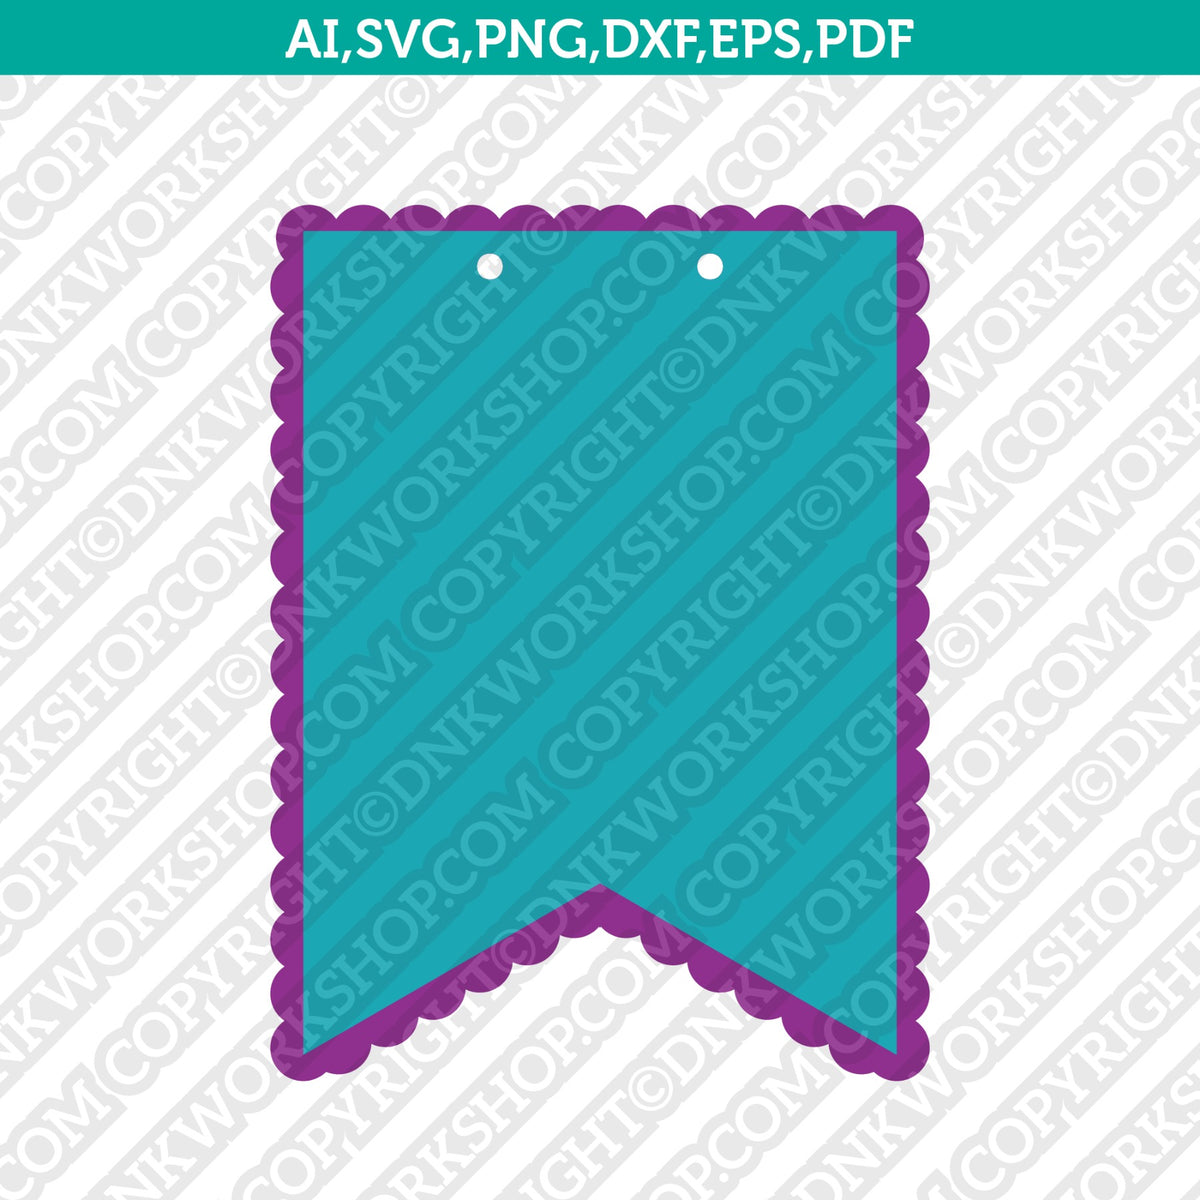 triangle banner printable